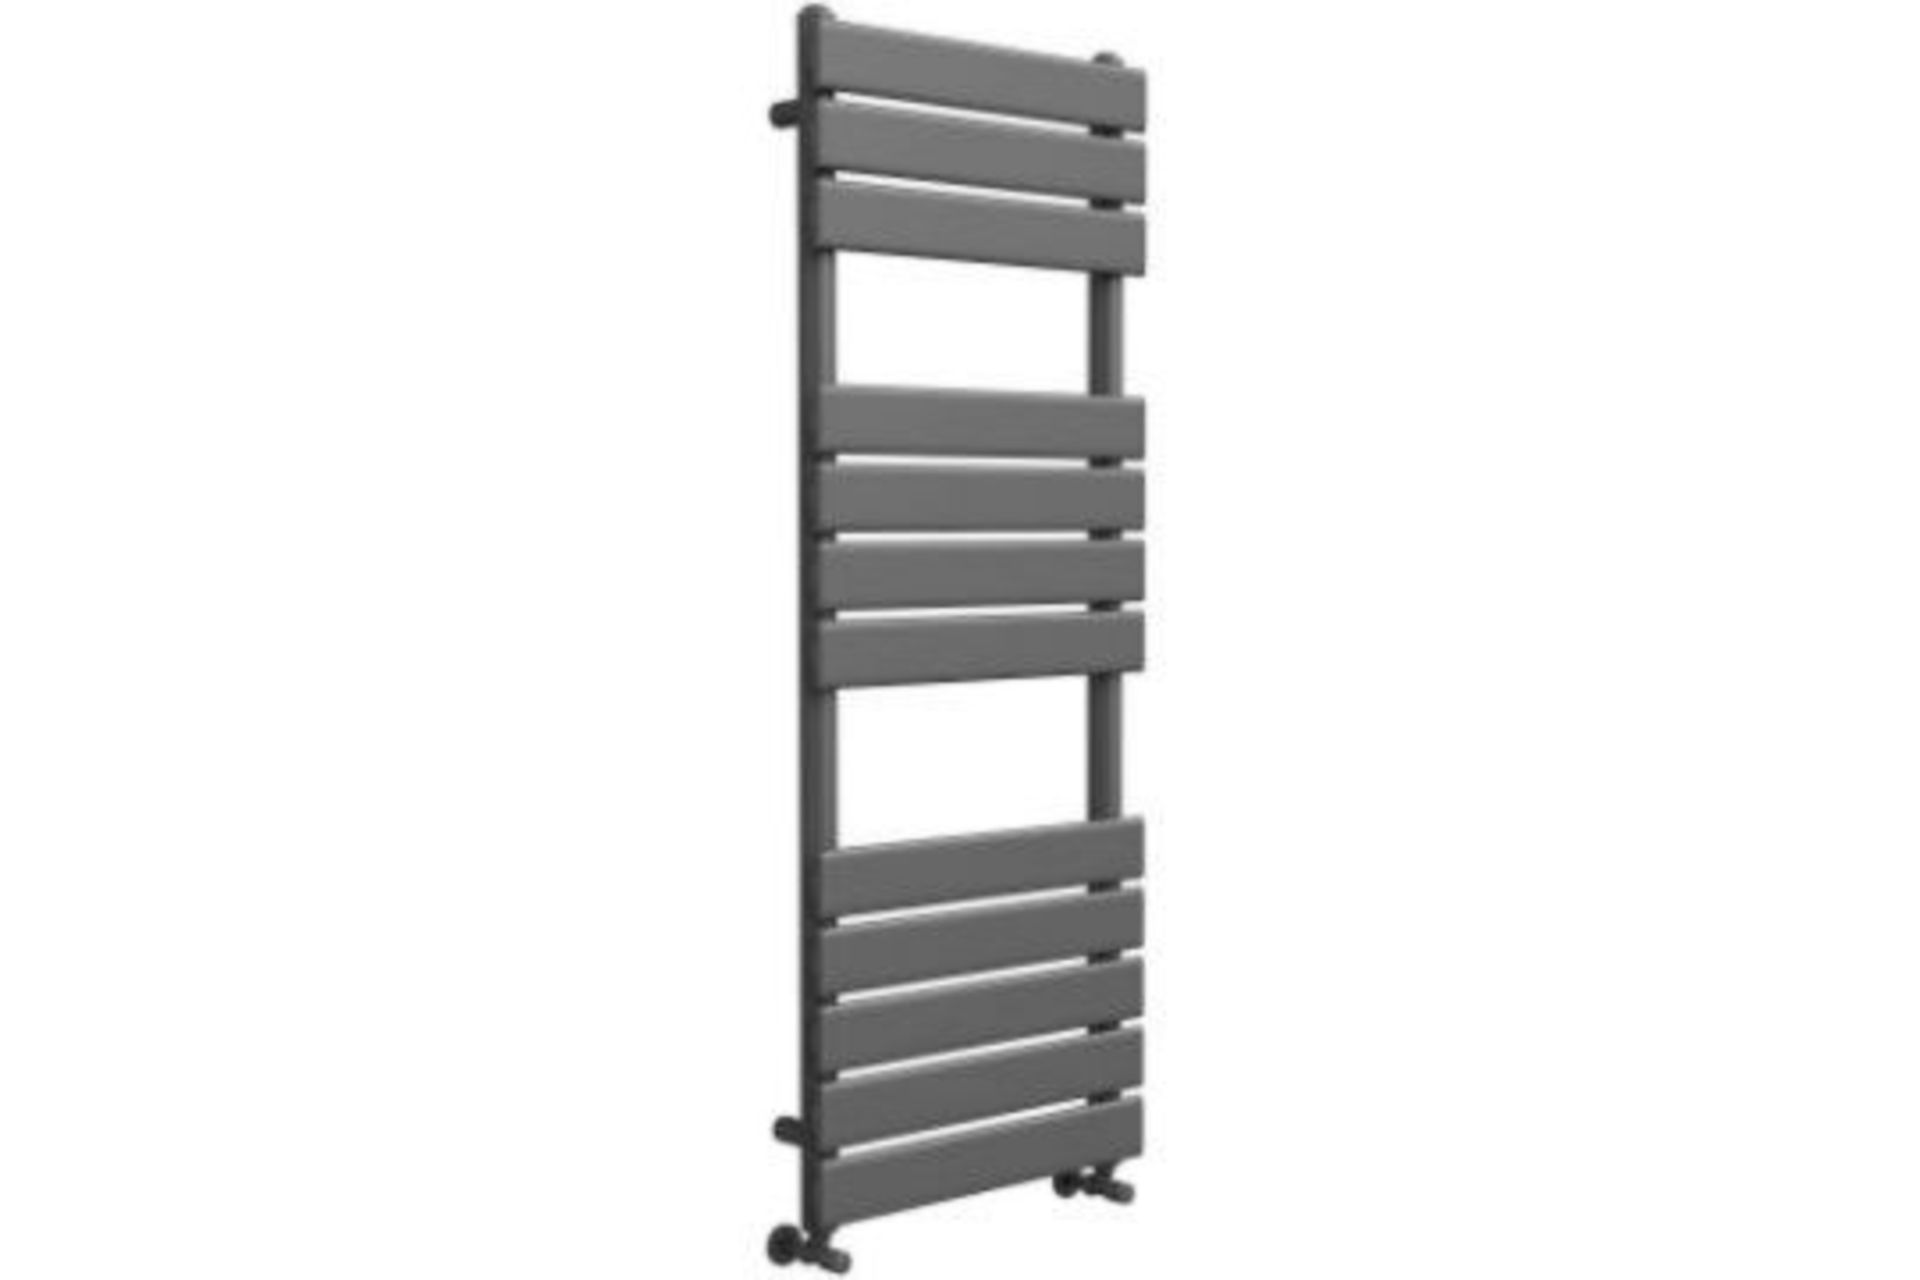 NEW & BOXED 1600x450 Anthracite Flat Panel Heated Towel Rail Bathroom Radiator. RRP £549.99.R... - Image 2 of 2